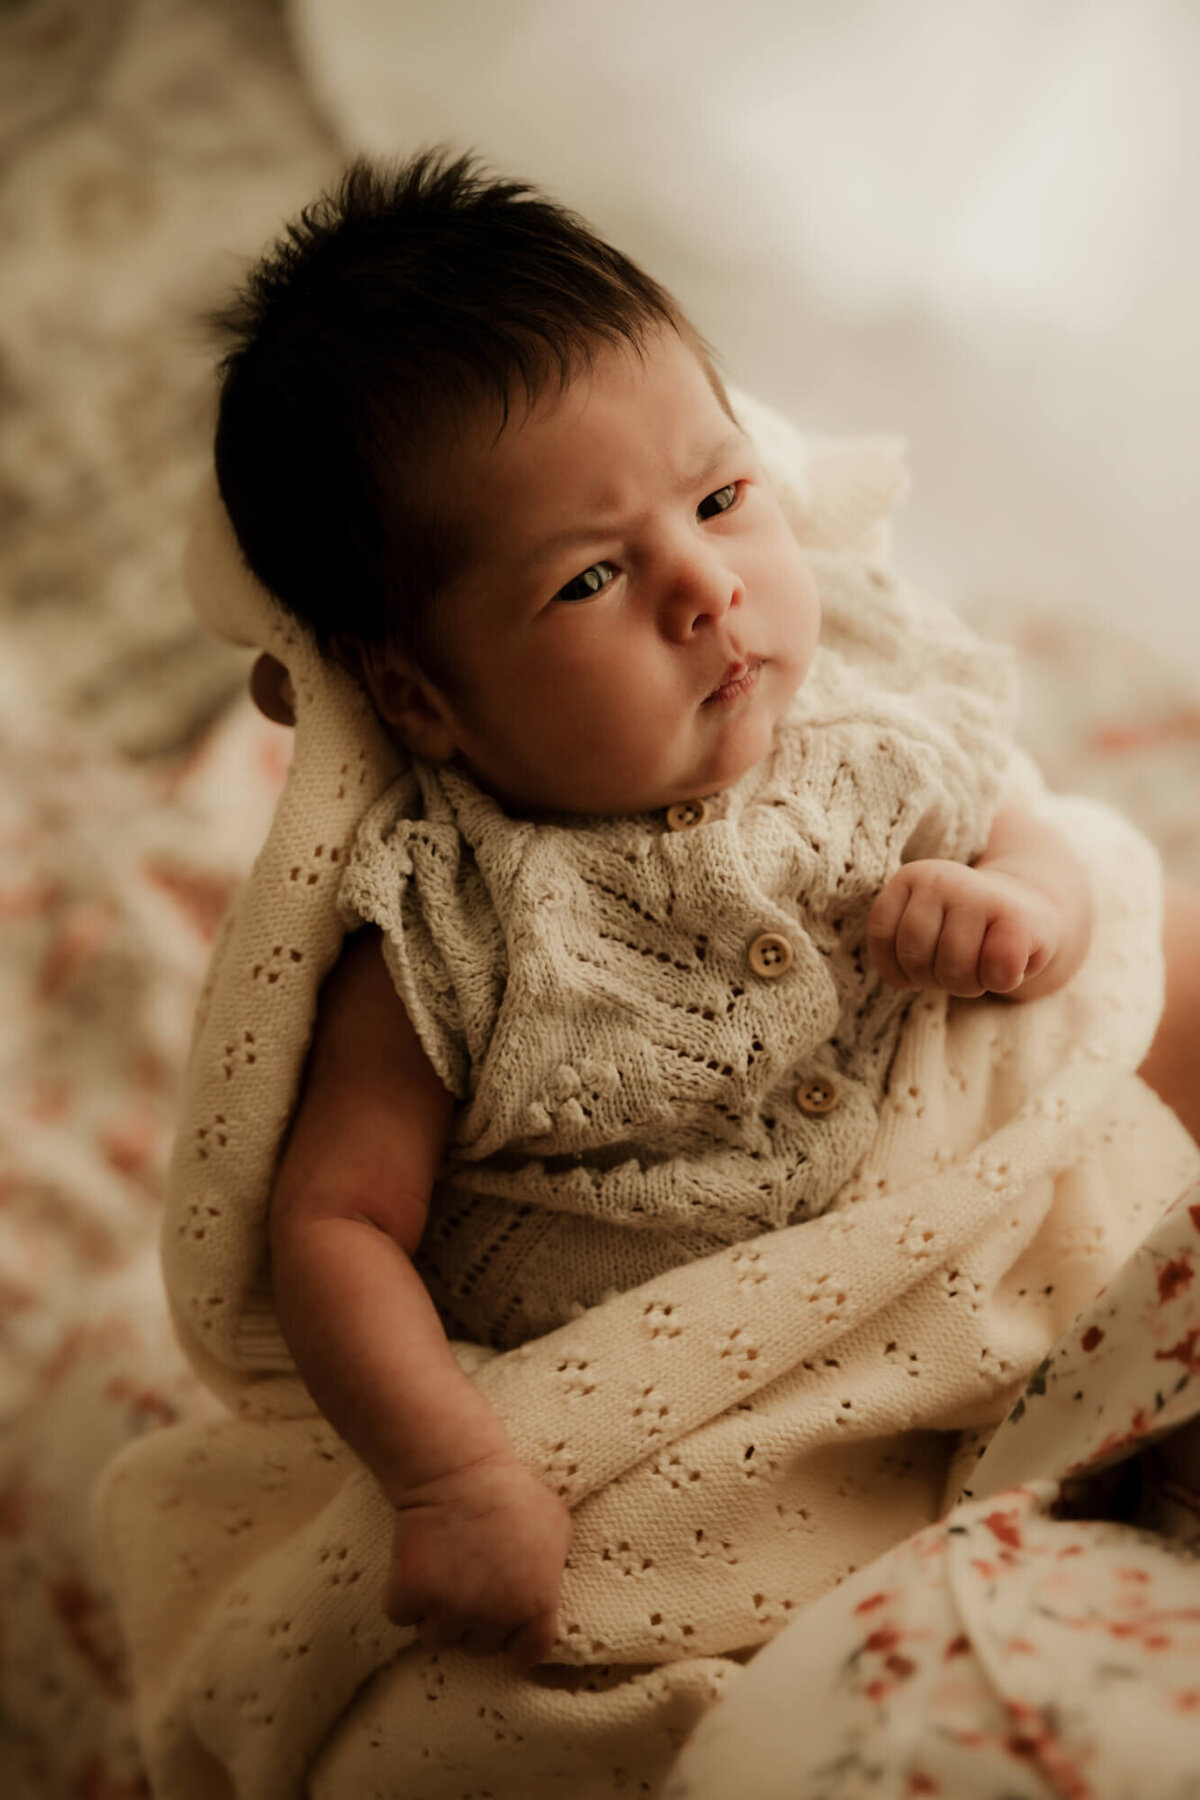 Baby with black hair wrapped in a cream colored blanket wearing a buttoned romper